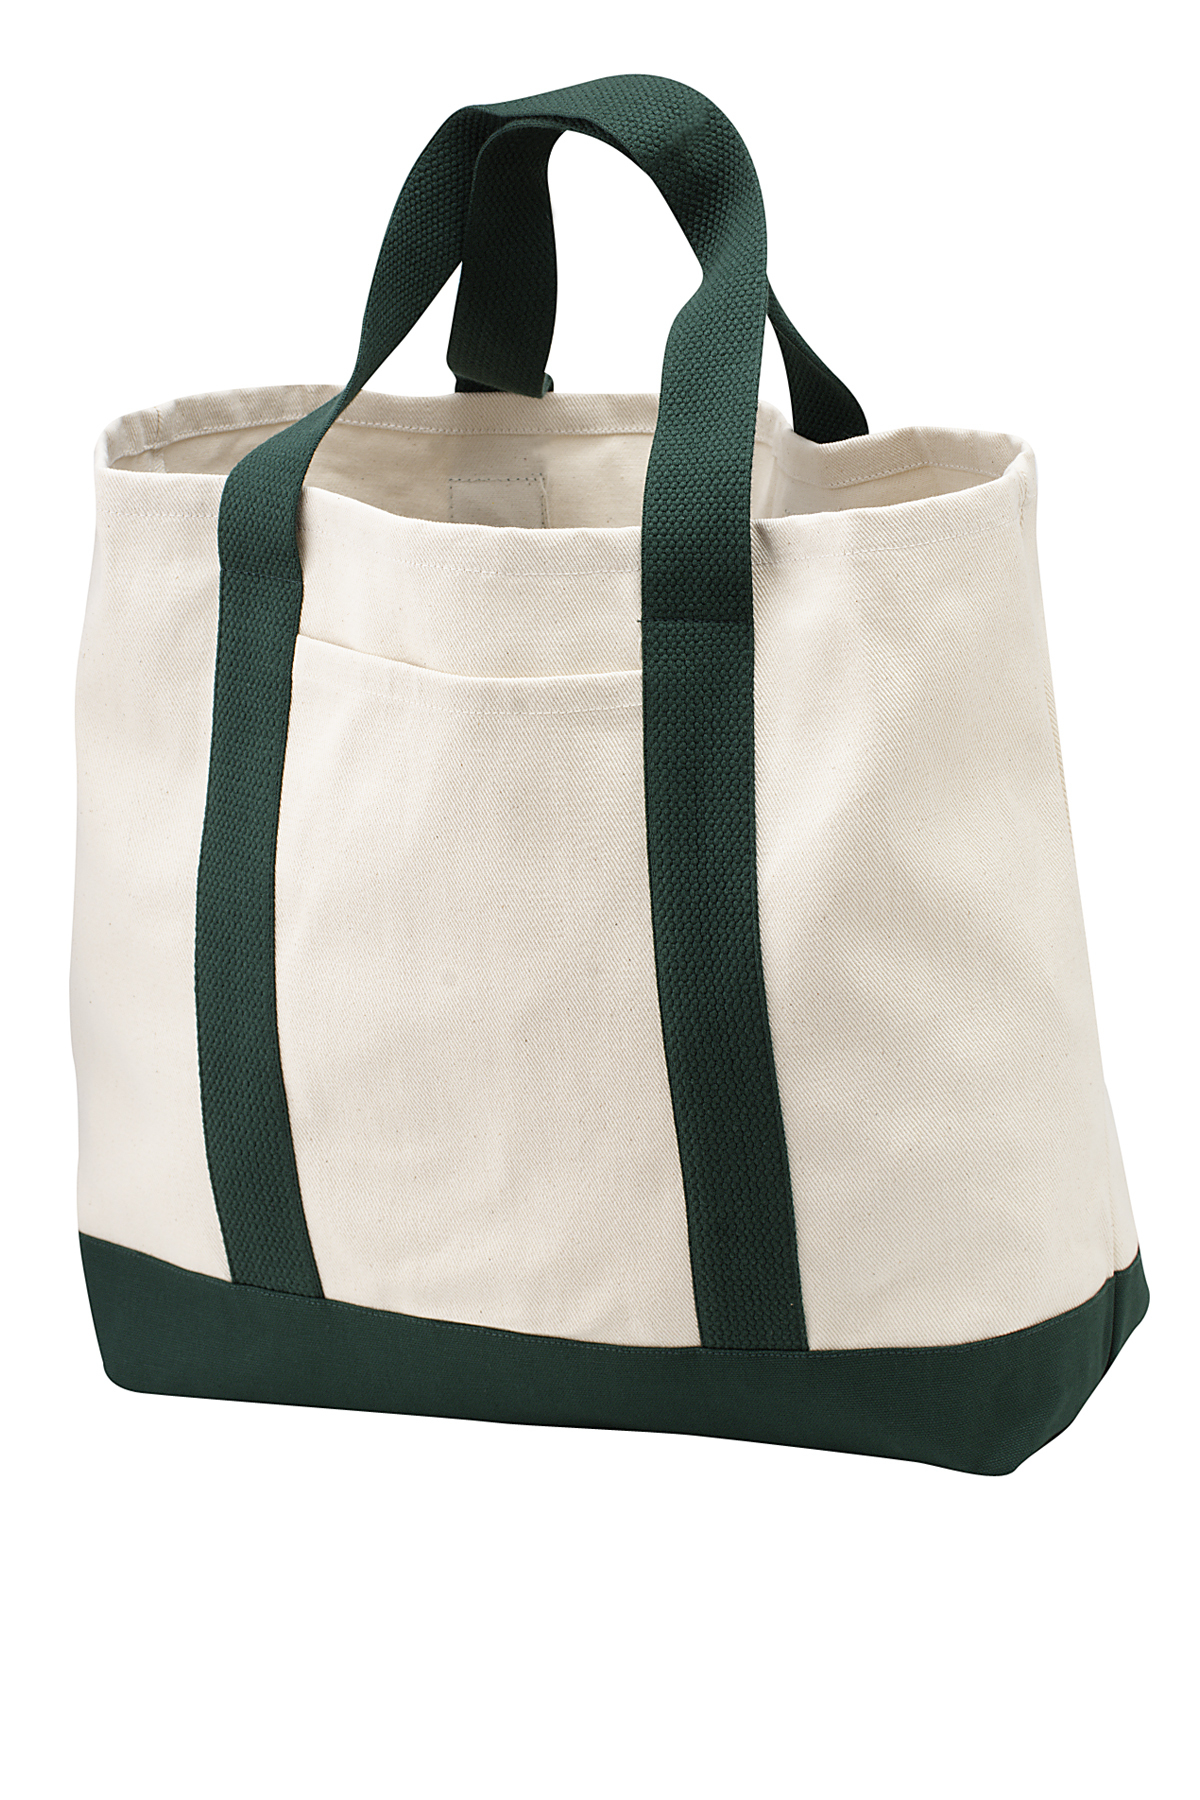 port authority Ideal Twill Two-Tone Shopping Tote